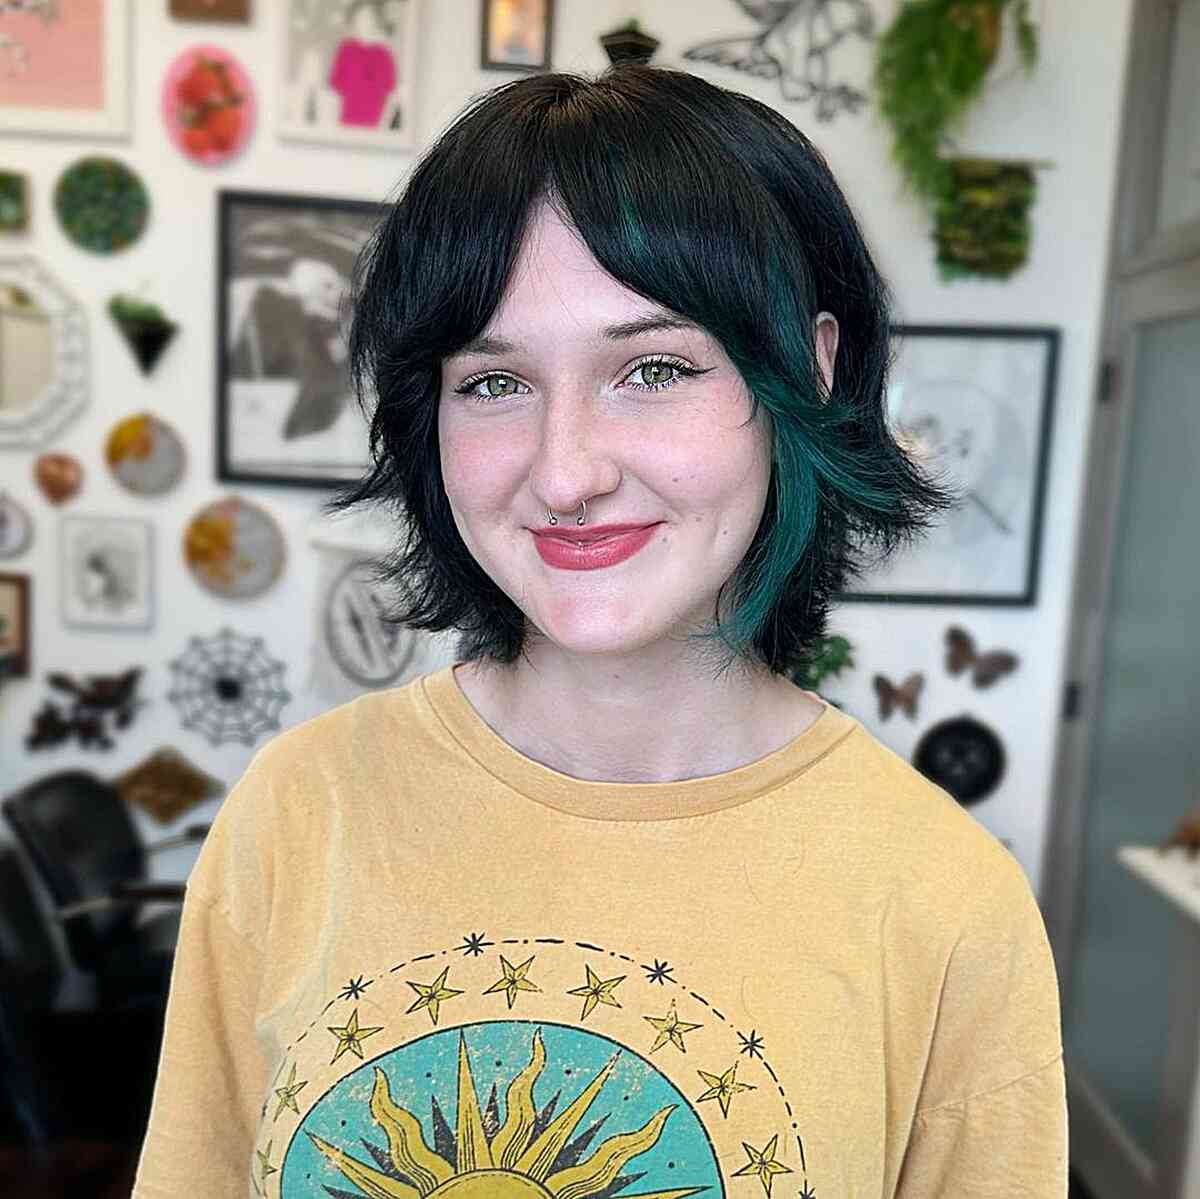 Short Razored Bob with Middle Part Face-Framing Bangs